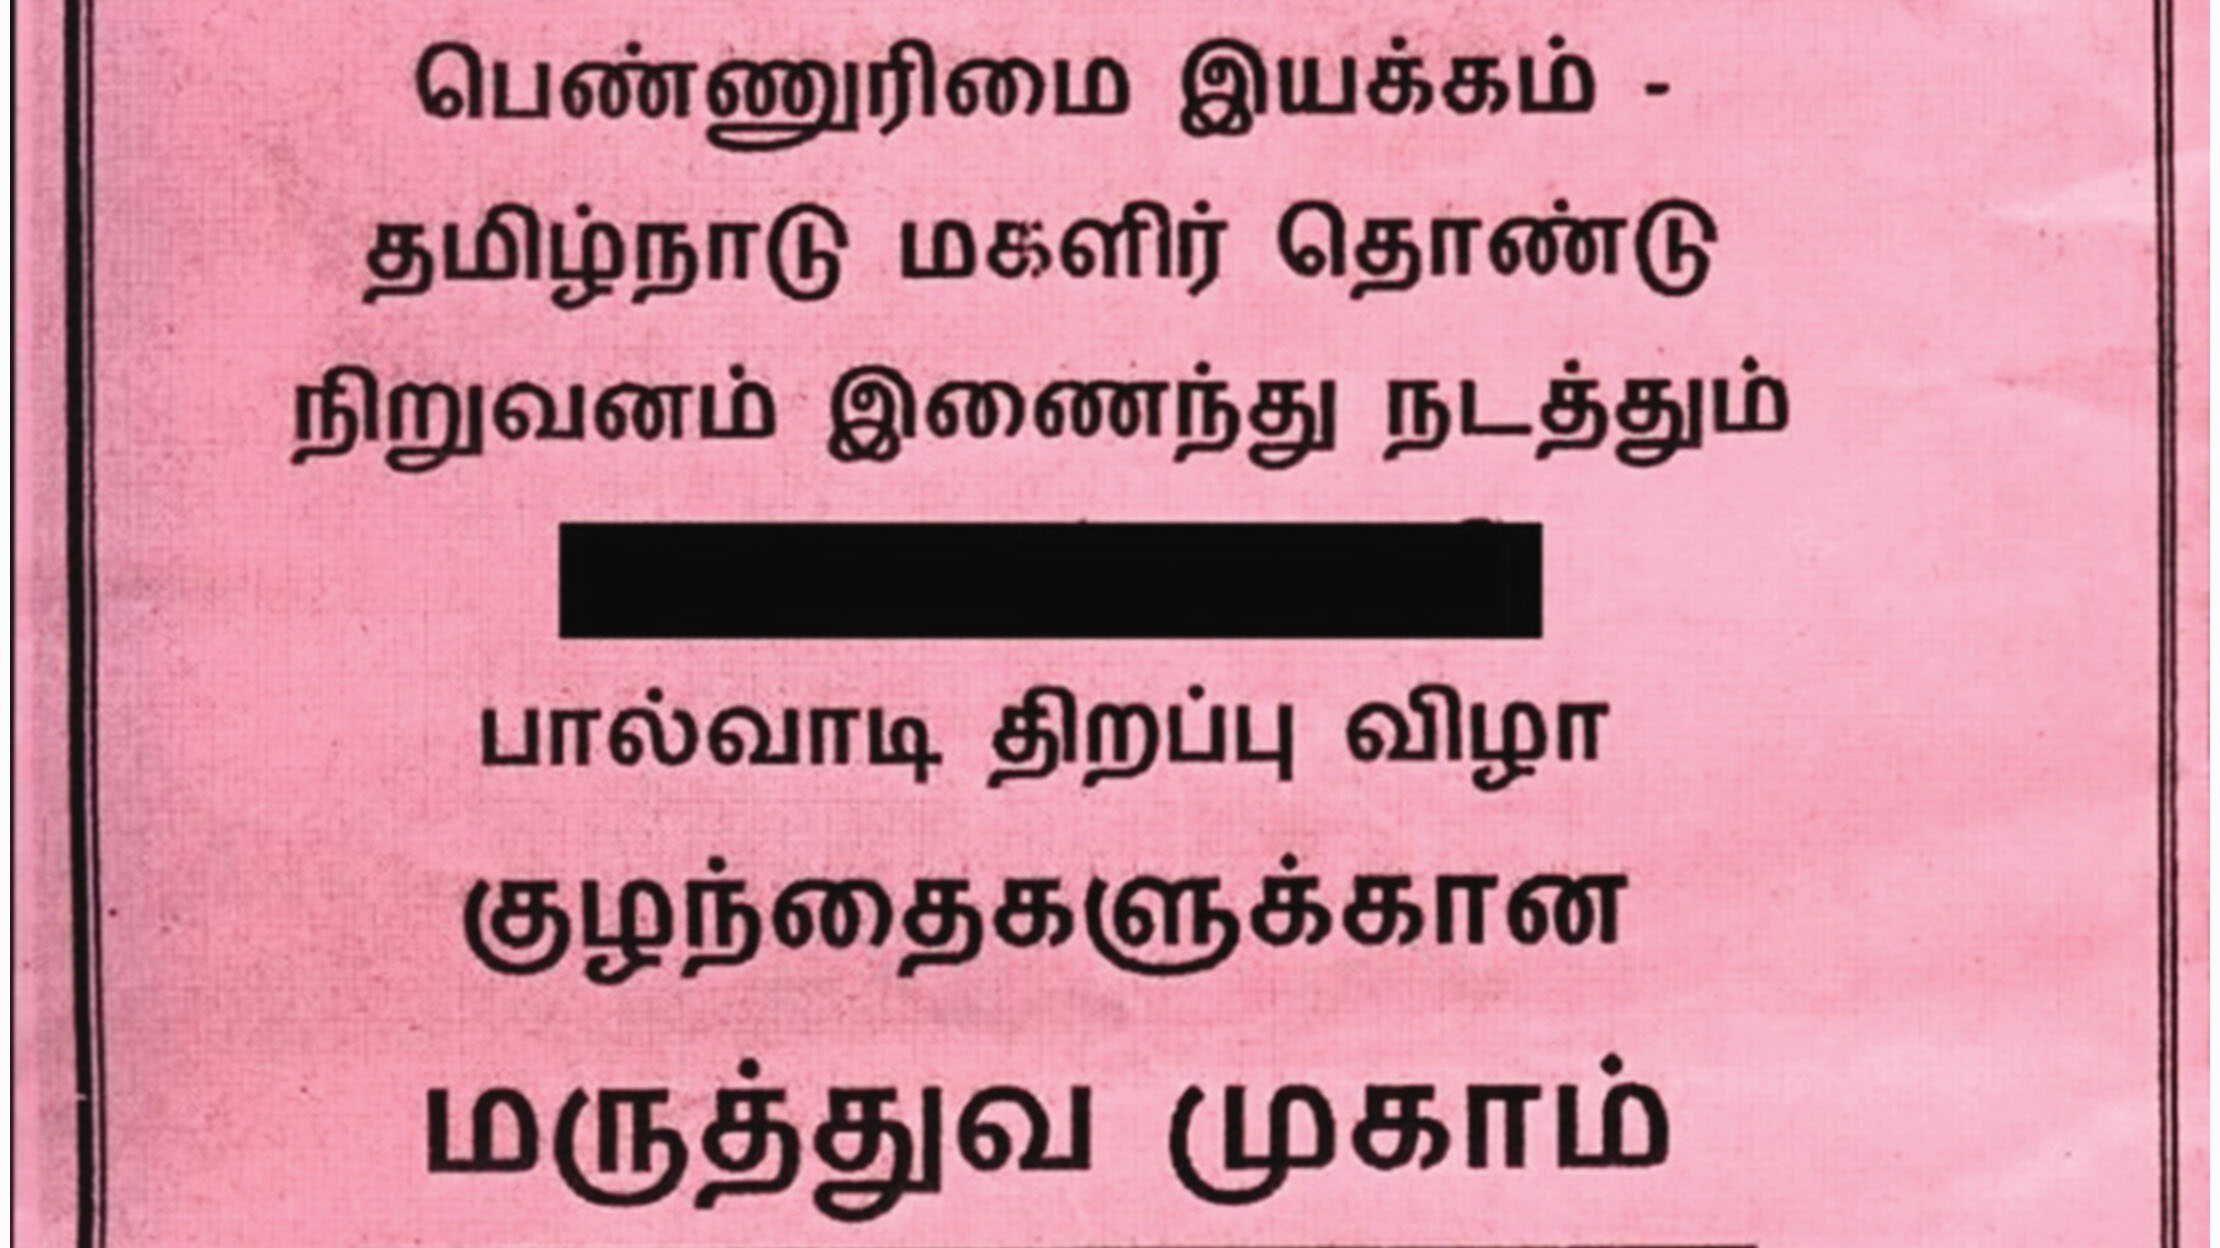 Pink poster. Text in Tamil inviting residents to the opening of the childcare center